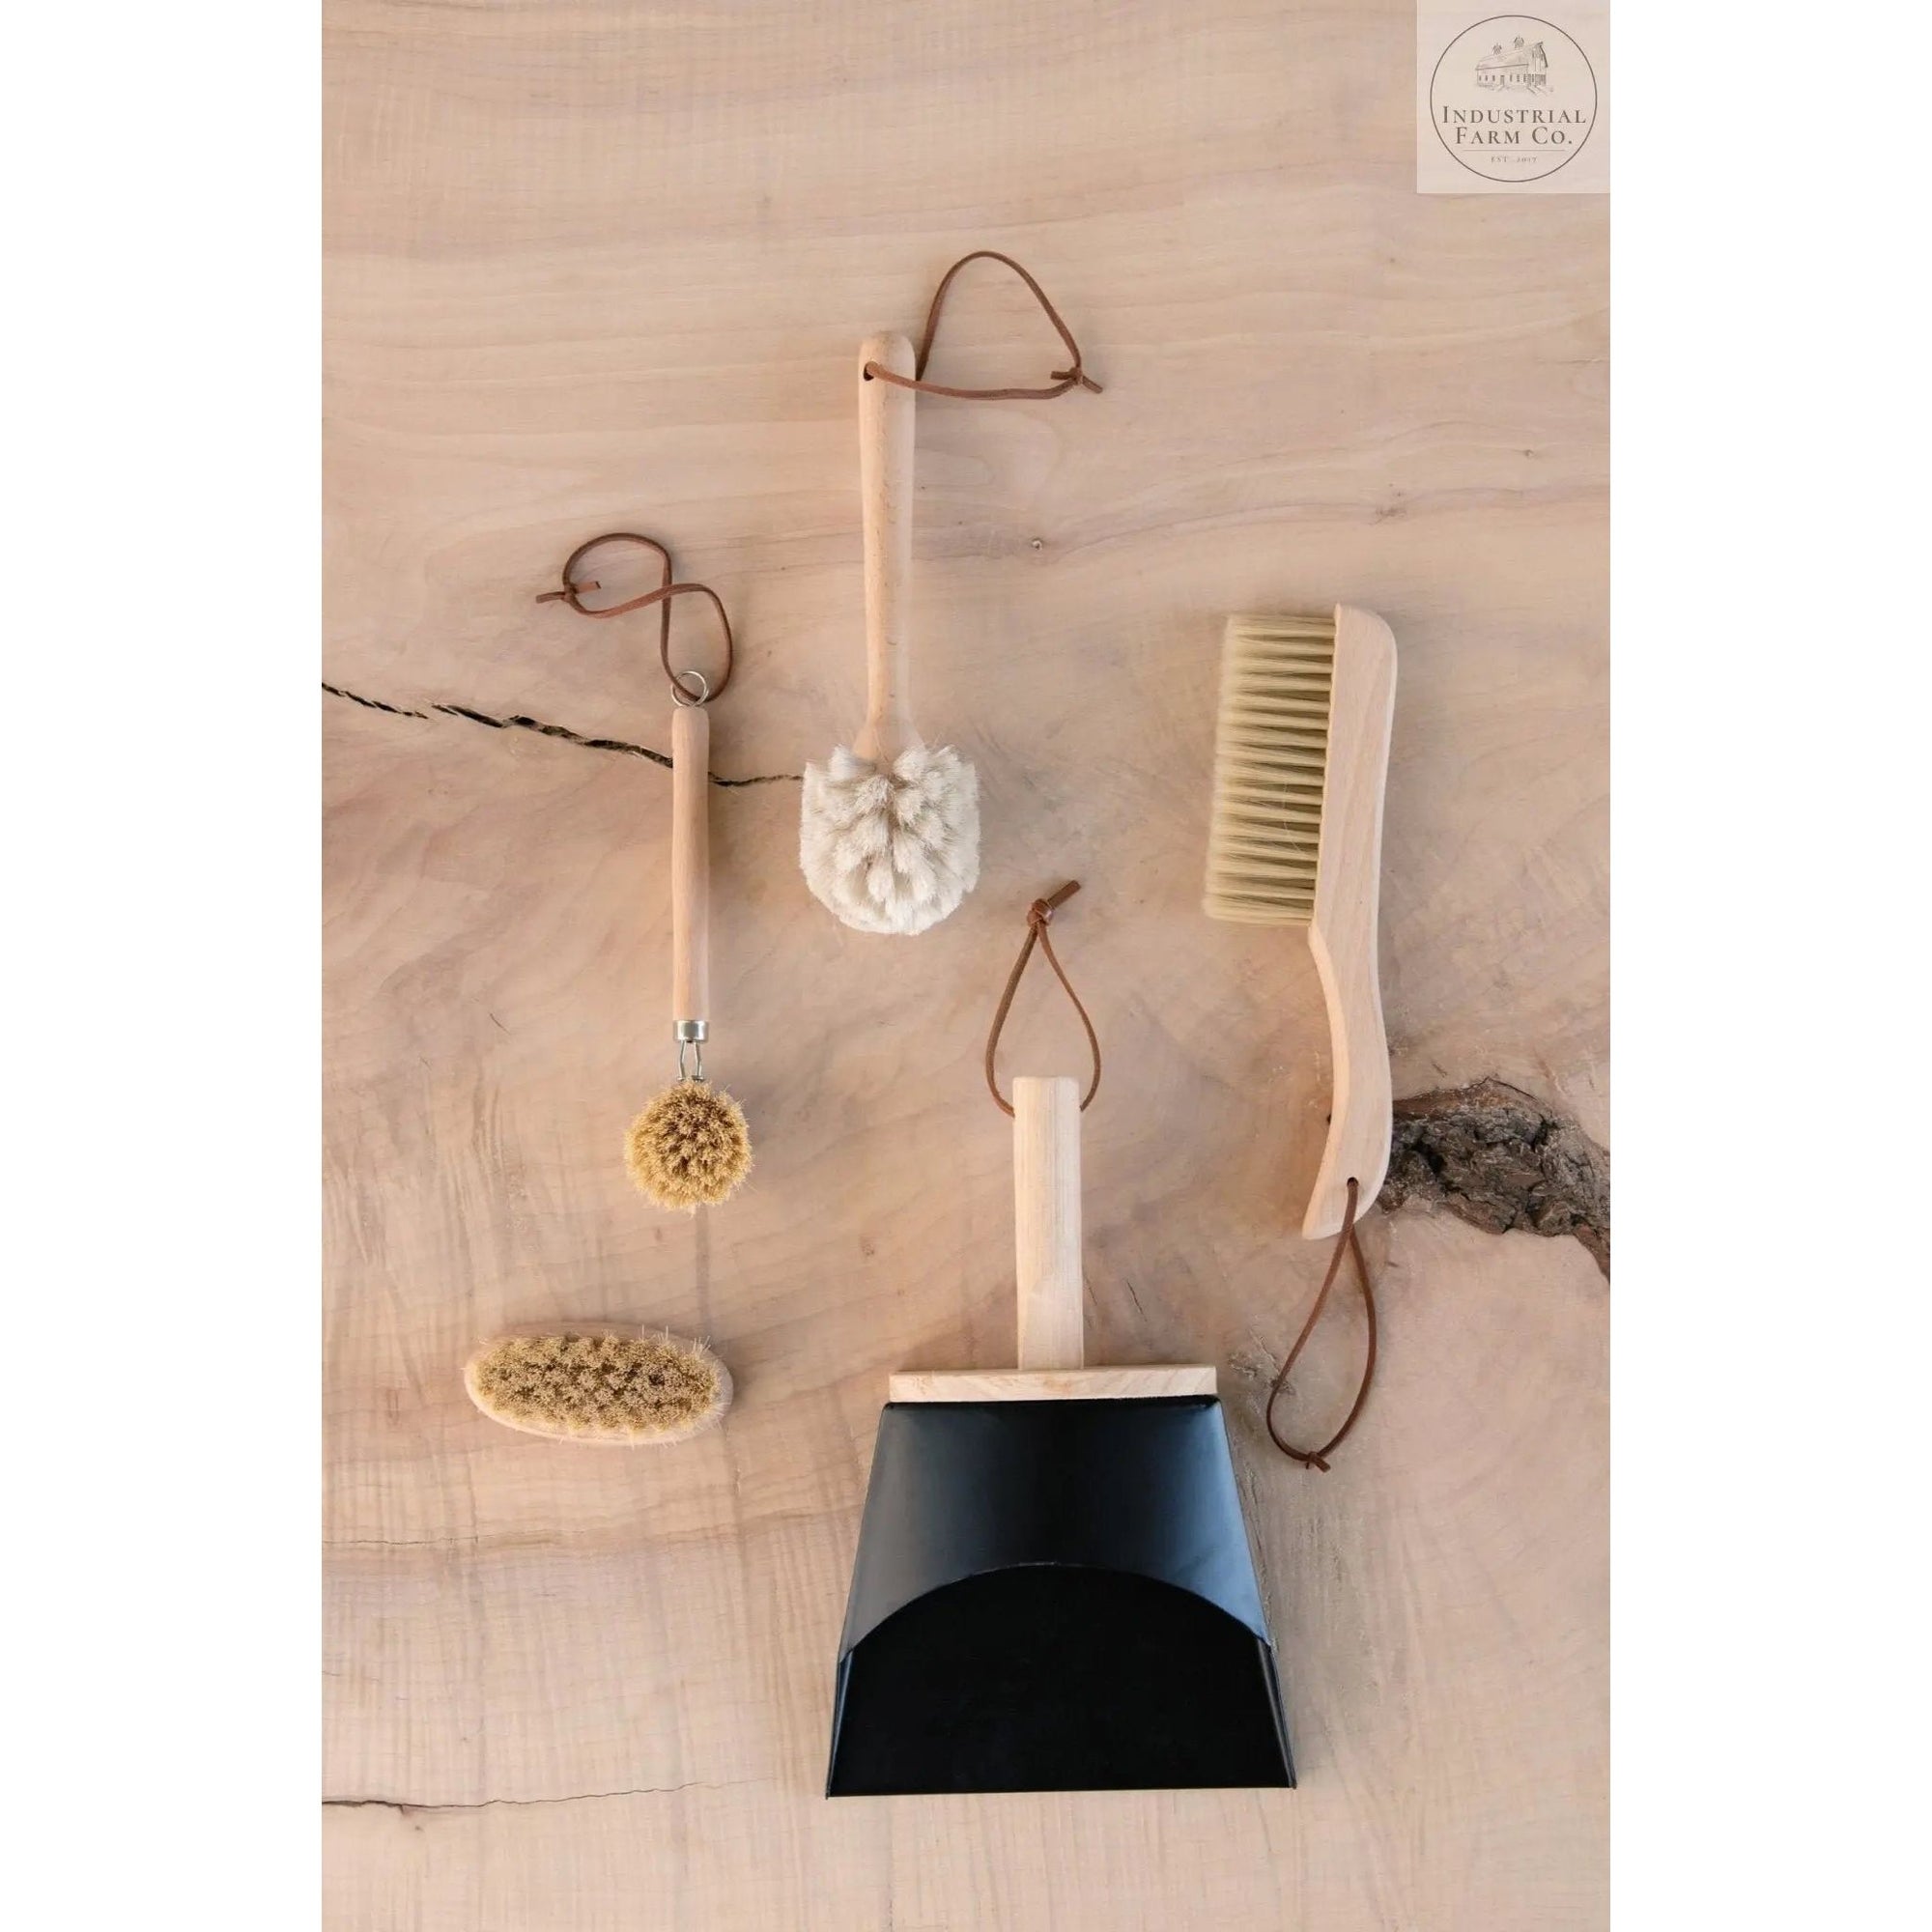 Beech Wood Brush and Dust Pan Set | Industrial Farm Co